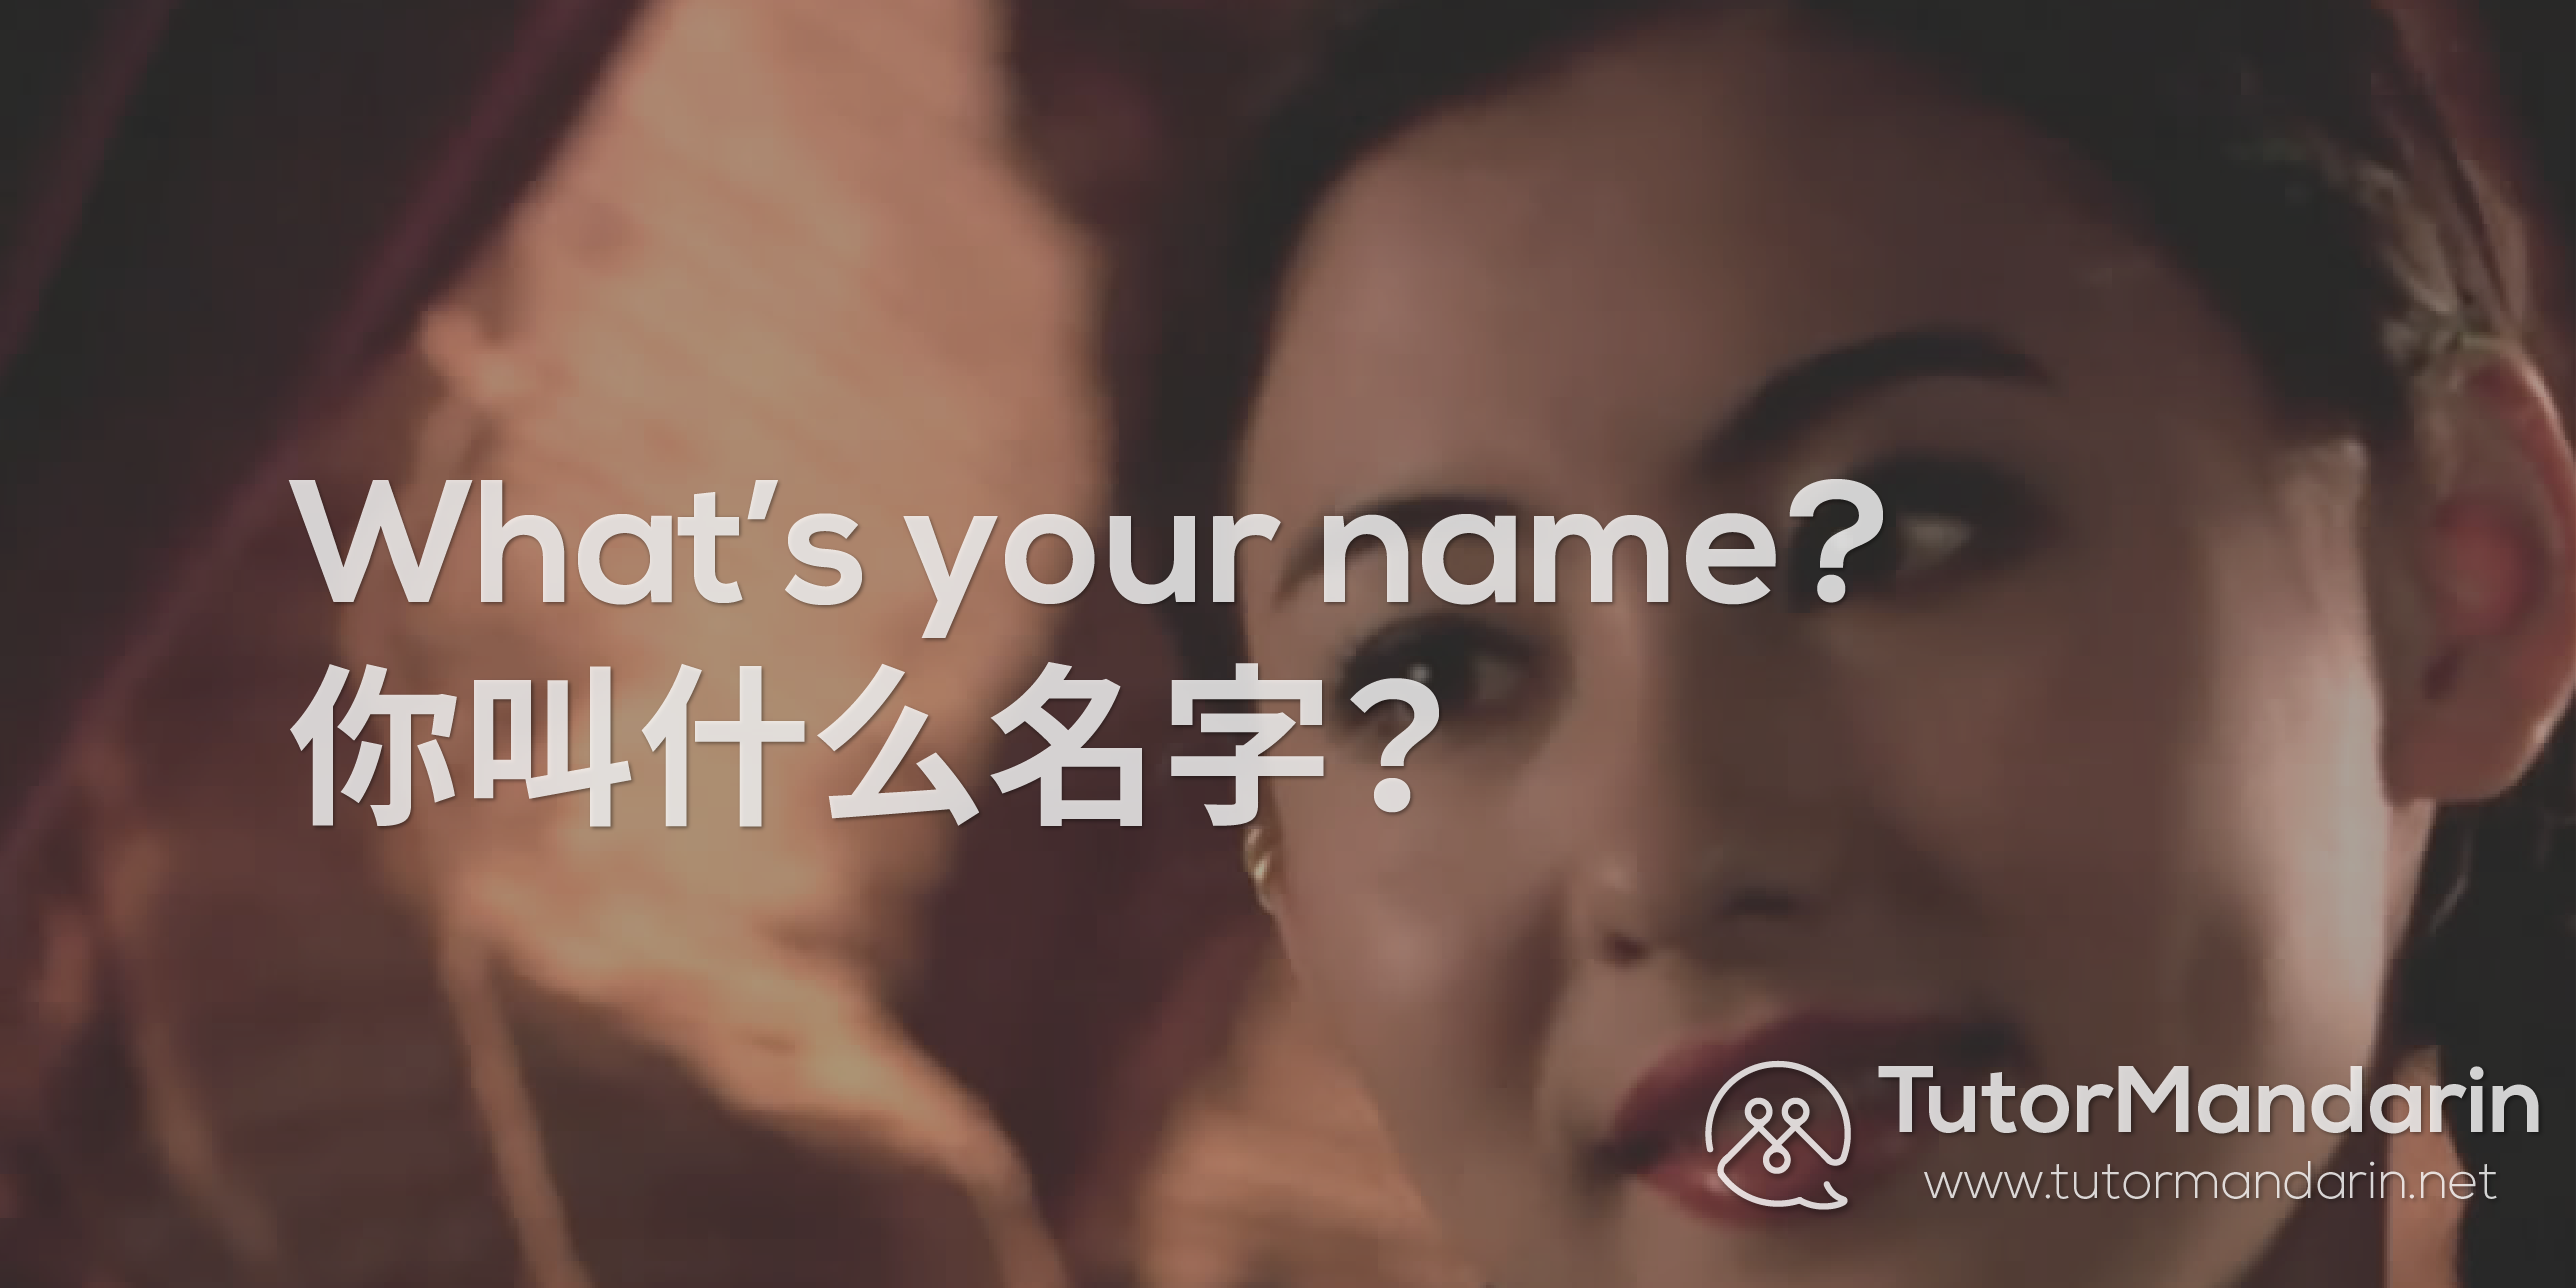 how to ask name in mandarin